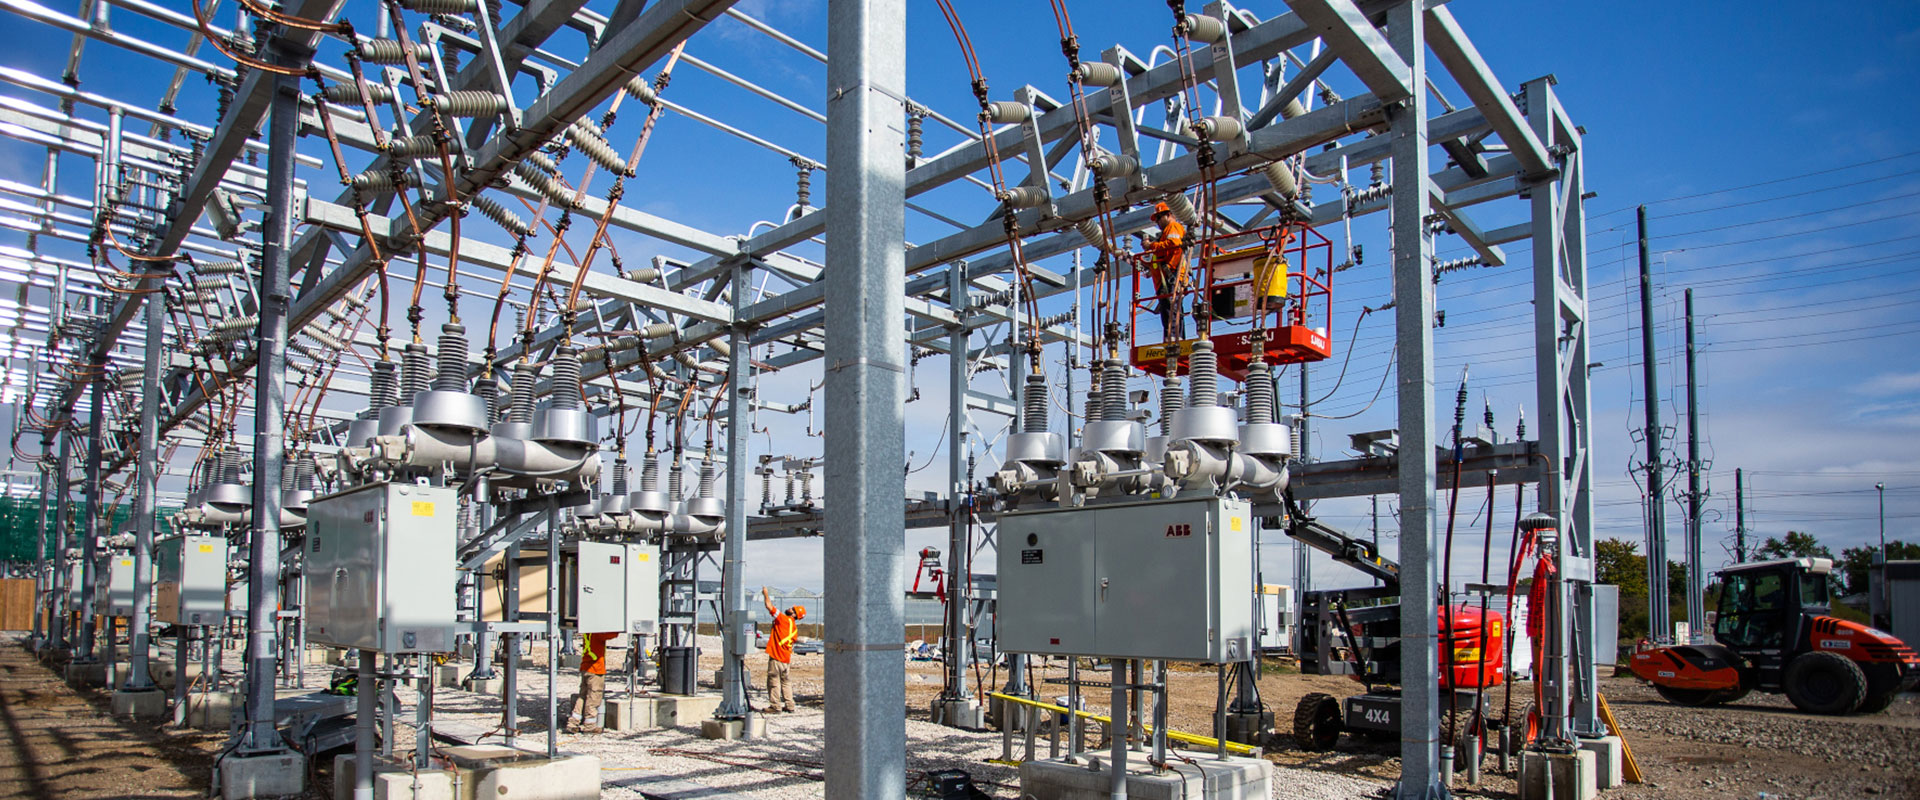 A team of B&M electrical tradesperson working on a construction of a high voltage substation